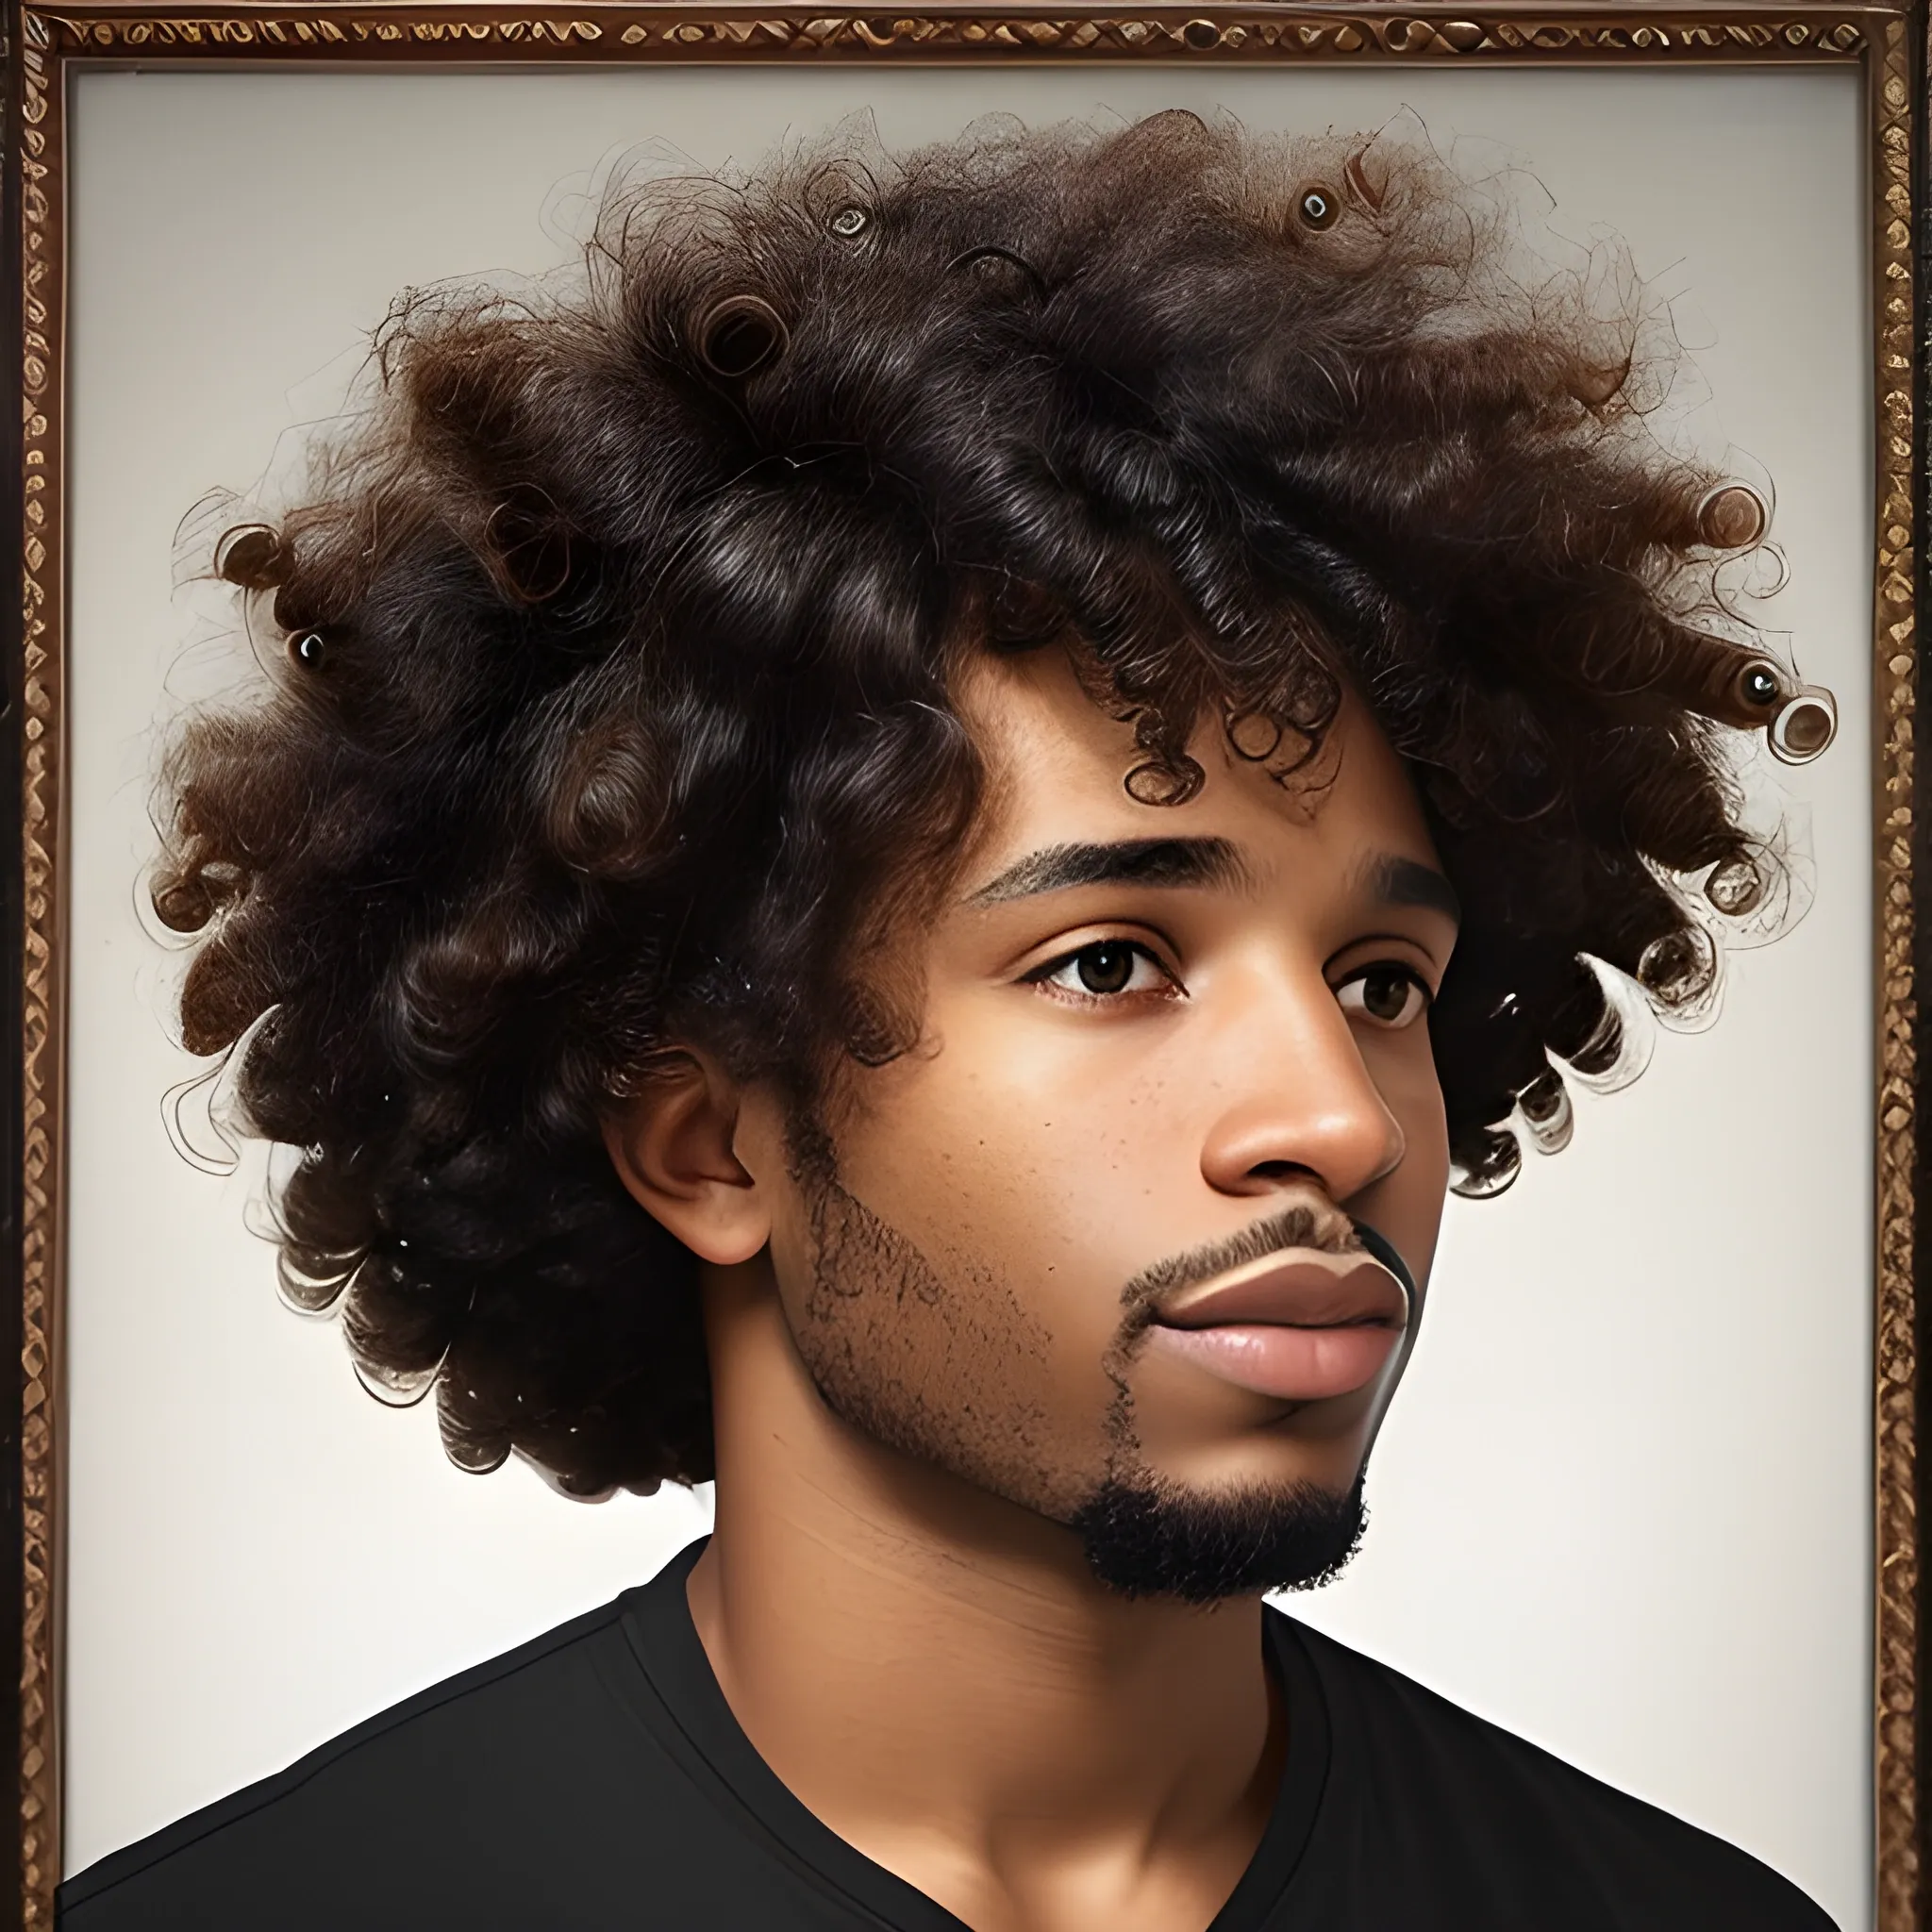 a portrait of a black guy with curly hair - Arthub.ai